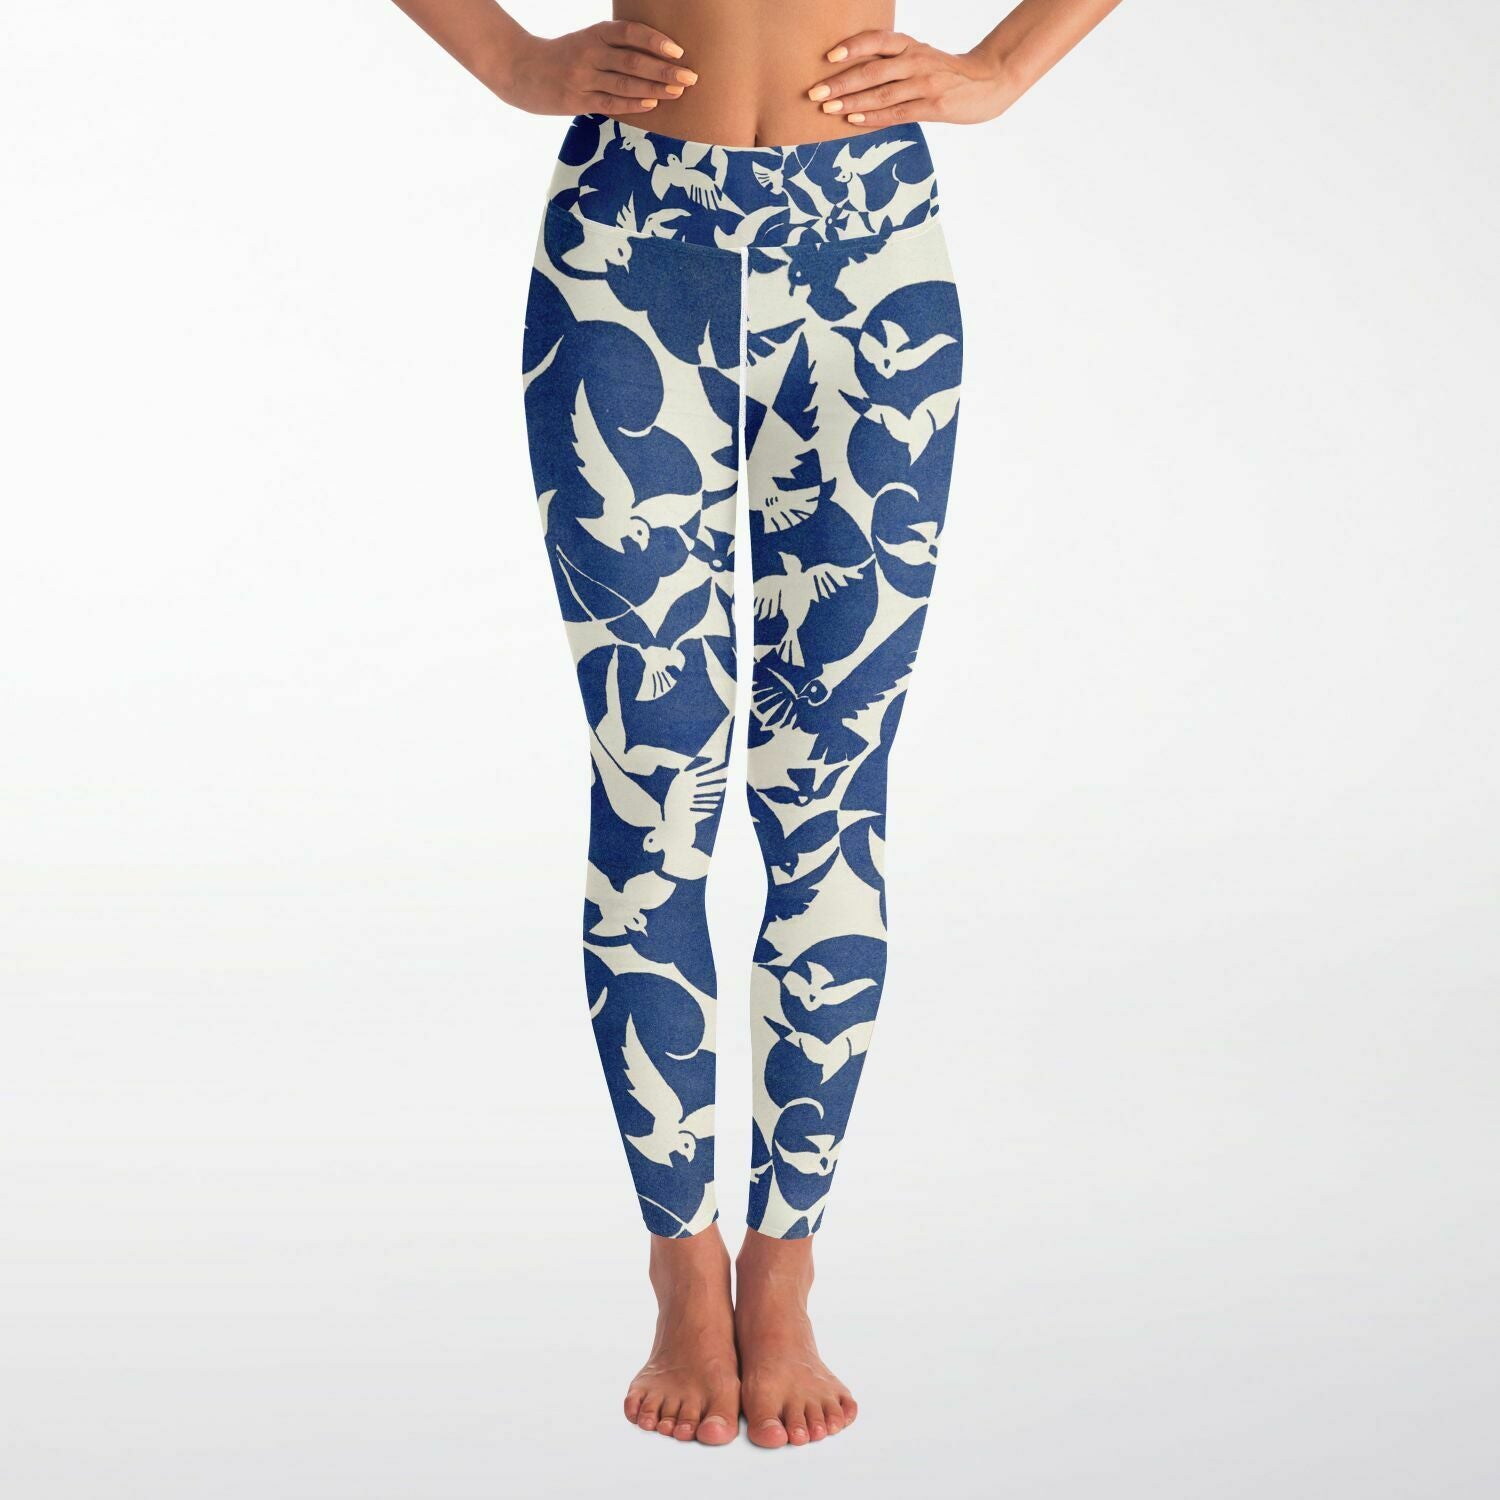 Pigeons Pattern Yoga Pants (Blue and Beige/for women)